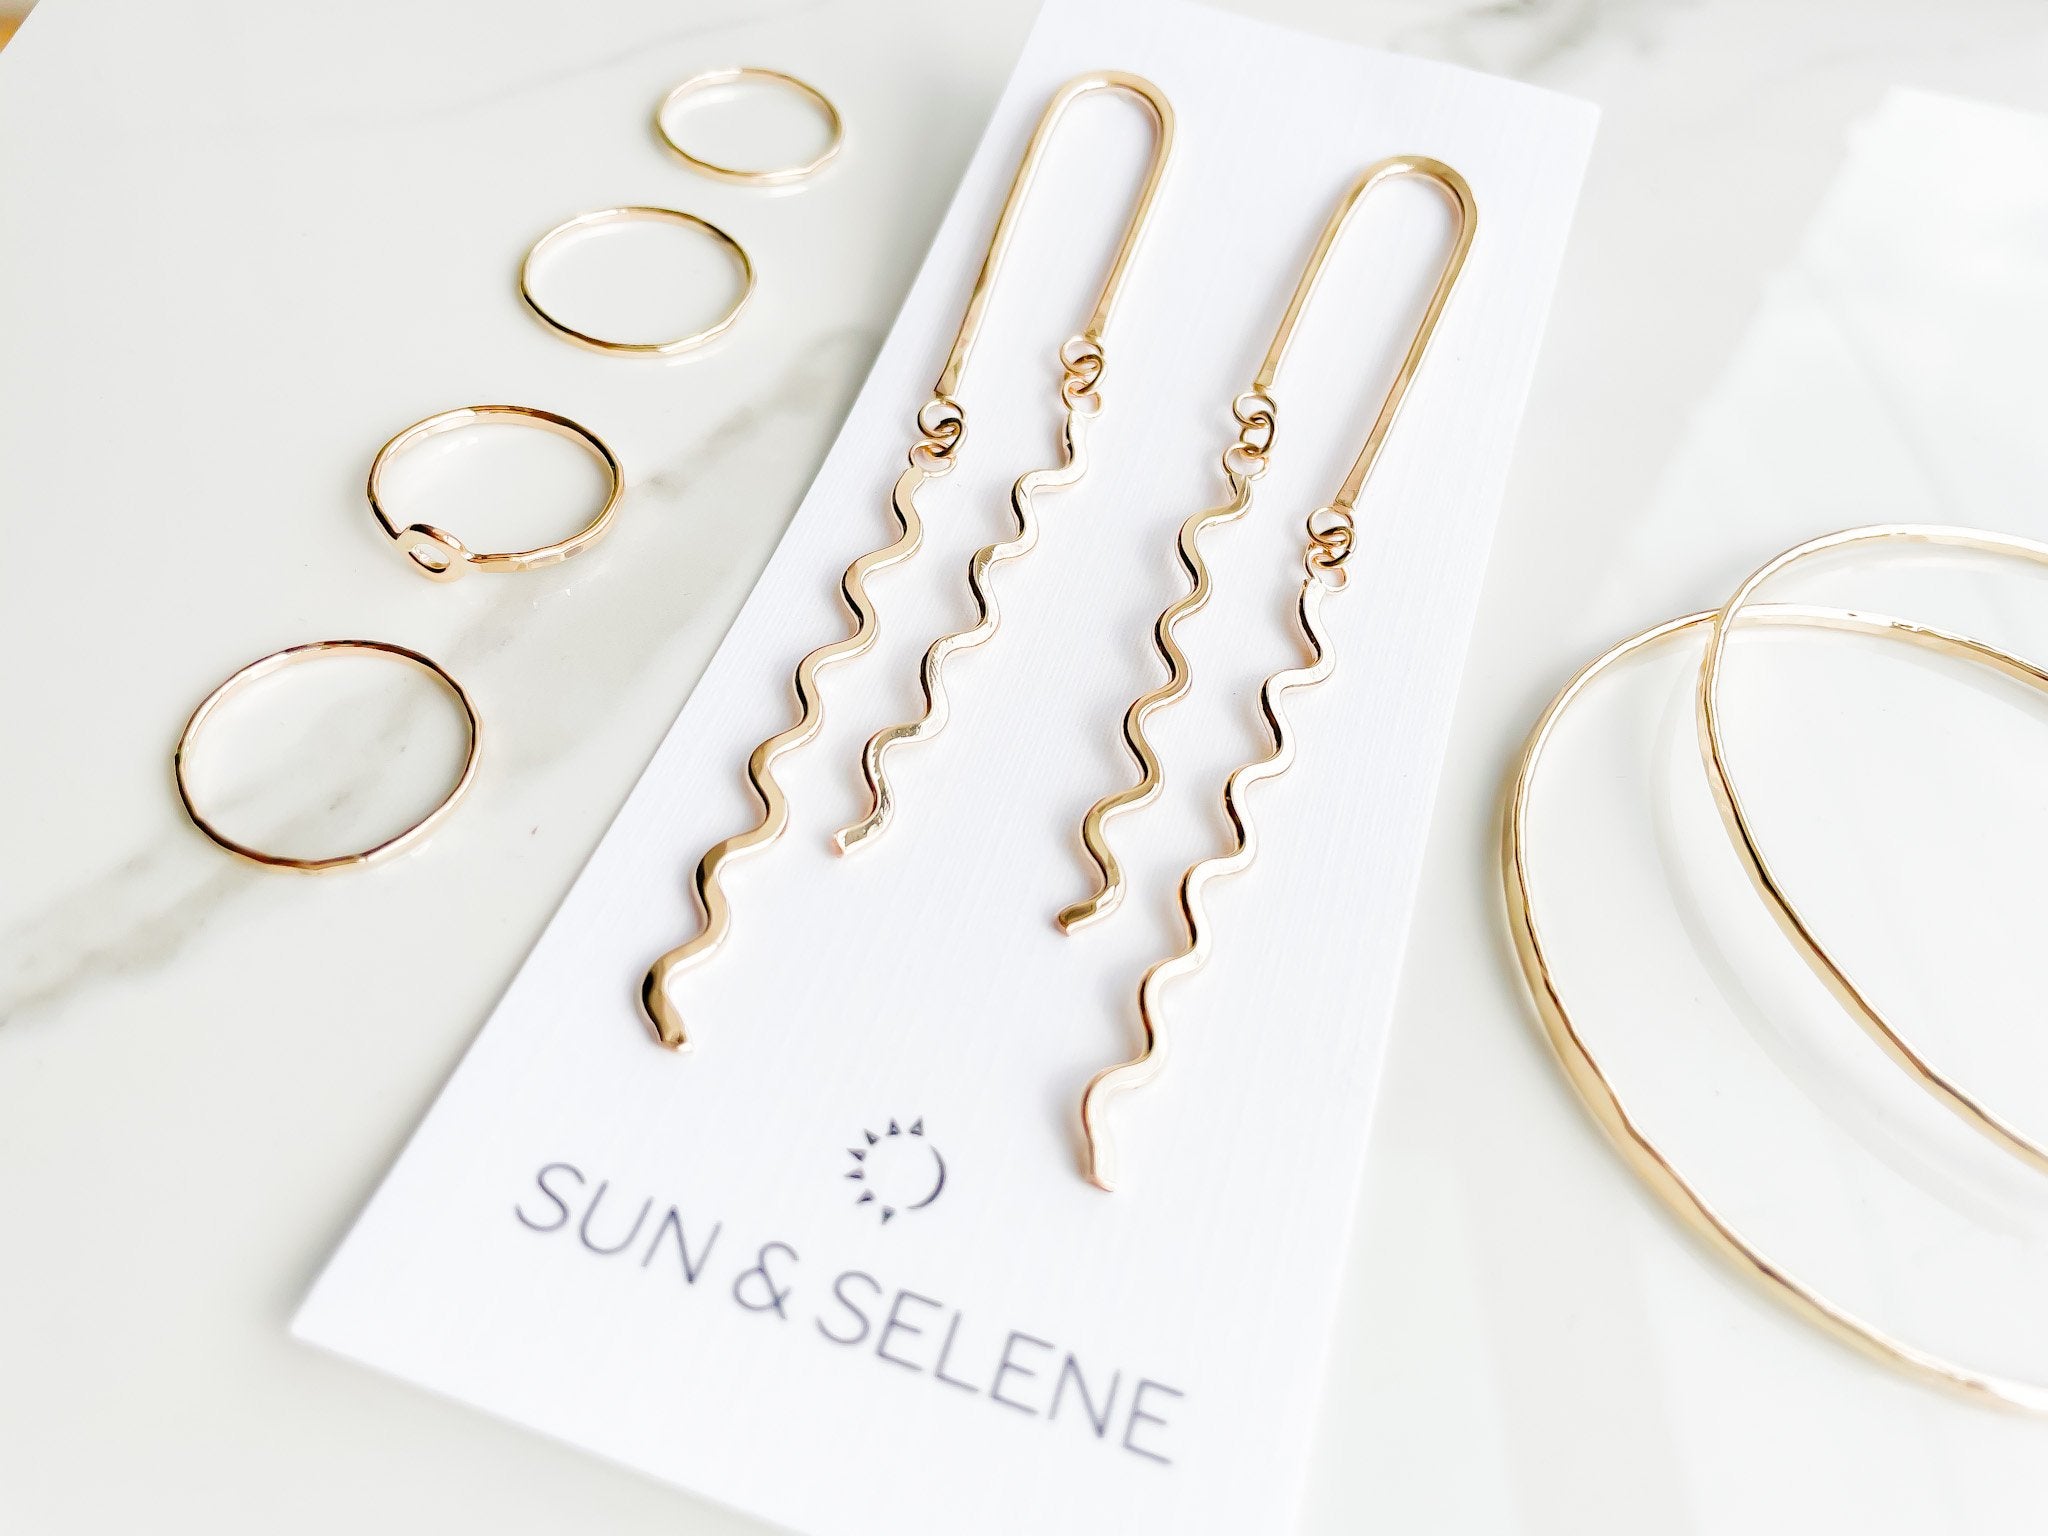 SUN & SELENE handcrafted jewelry collection